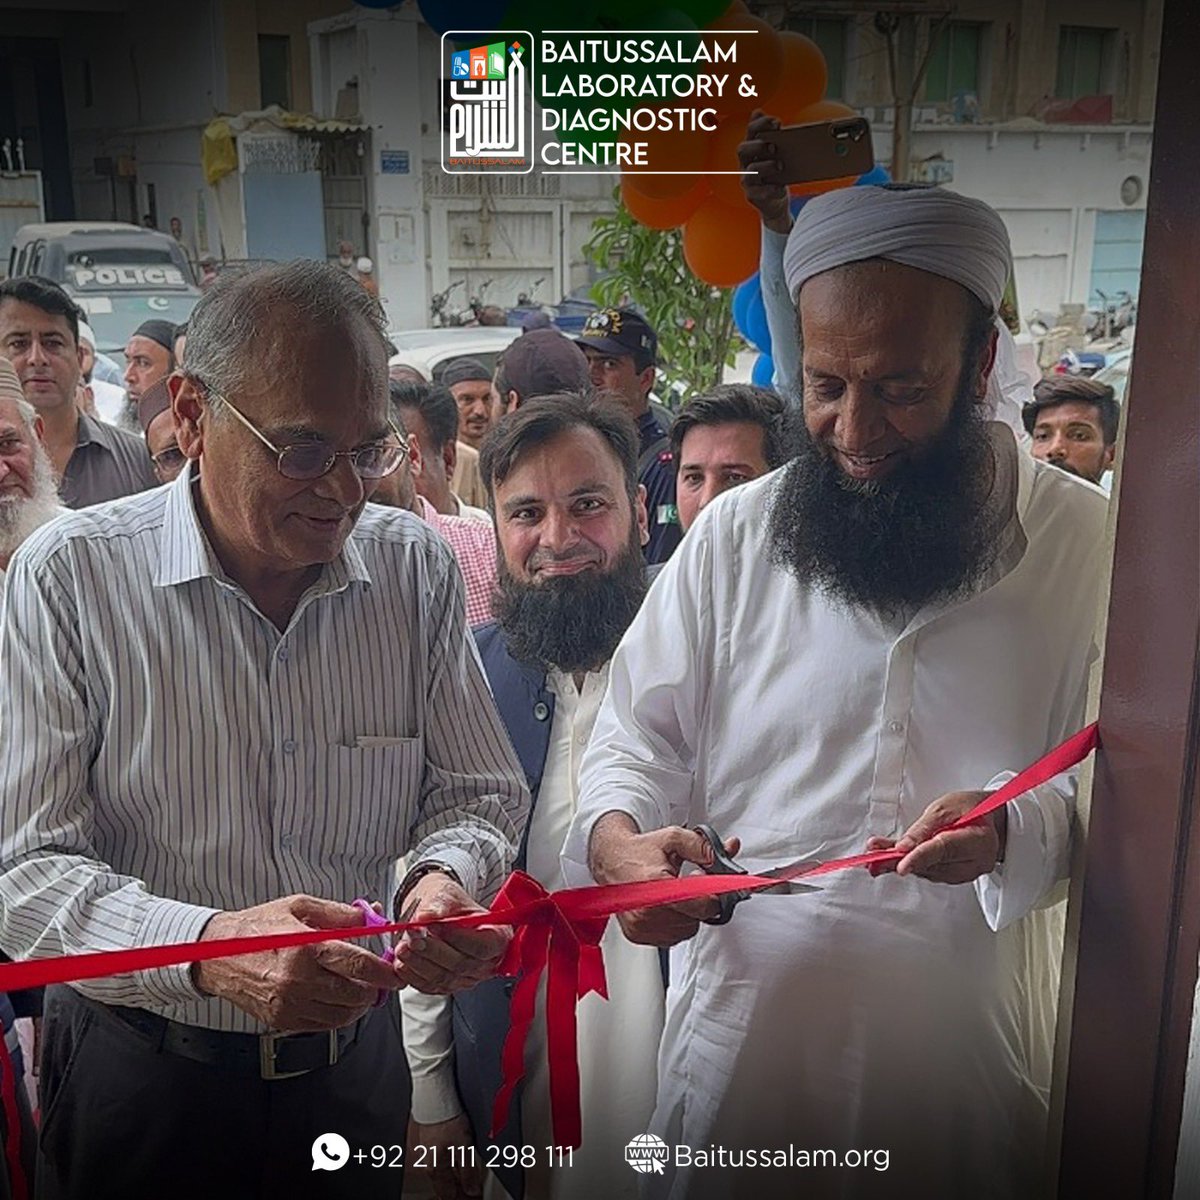 Alhamdulillah The Opening Of Our New Collection Unit Of  Baitussalam Lab And Diagnostic Center
Come Visit Us For All Your Testing Needs.

Location: maps.app.goo.gl/3cia3NWsGP1N7q…

For Appointments And Information:
+92-334-2982988
+92-21-35392634

#Baitusalaam #BaitusalaamWelfareTrust…